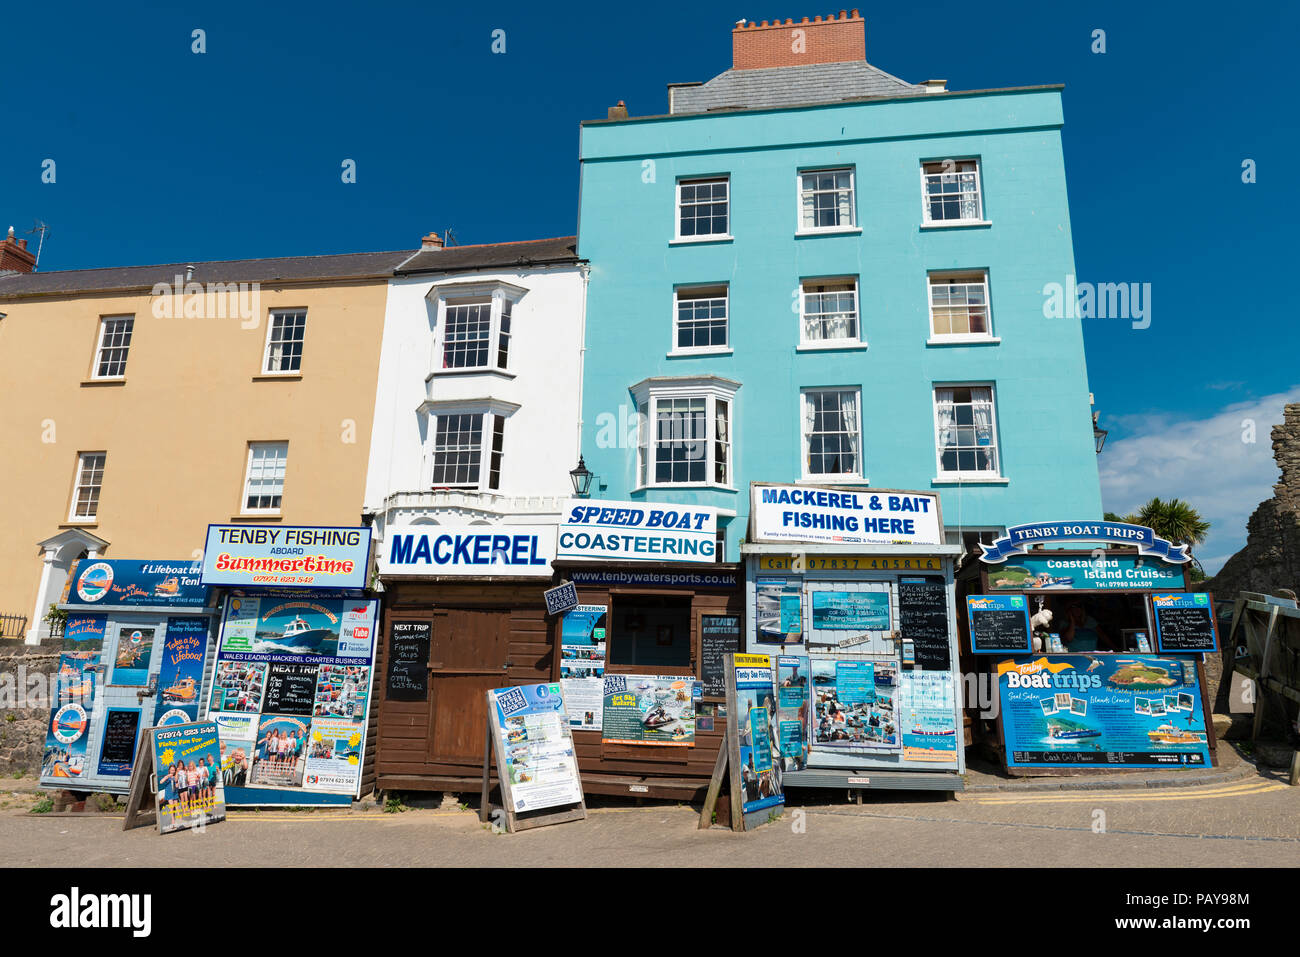 Huts selling boat trips in the pretty seaside town of Tenby, Pembrokeshire, Wales, UK. Stock Photo